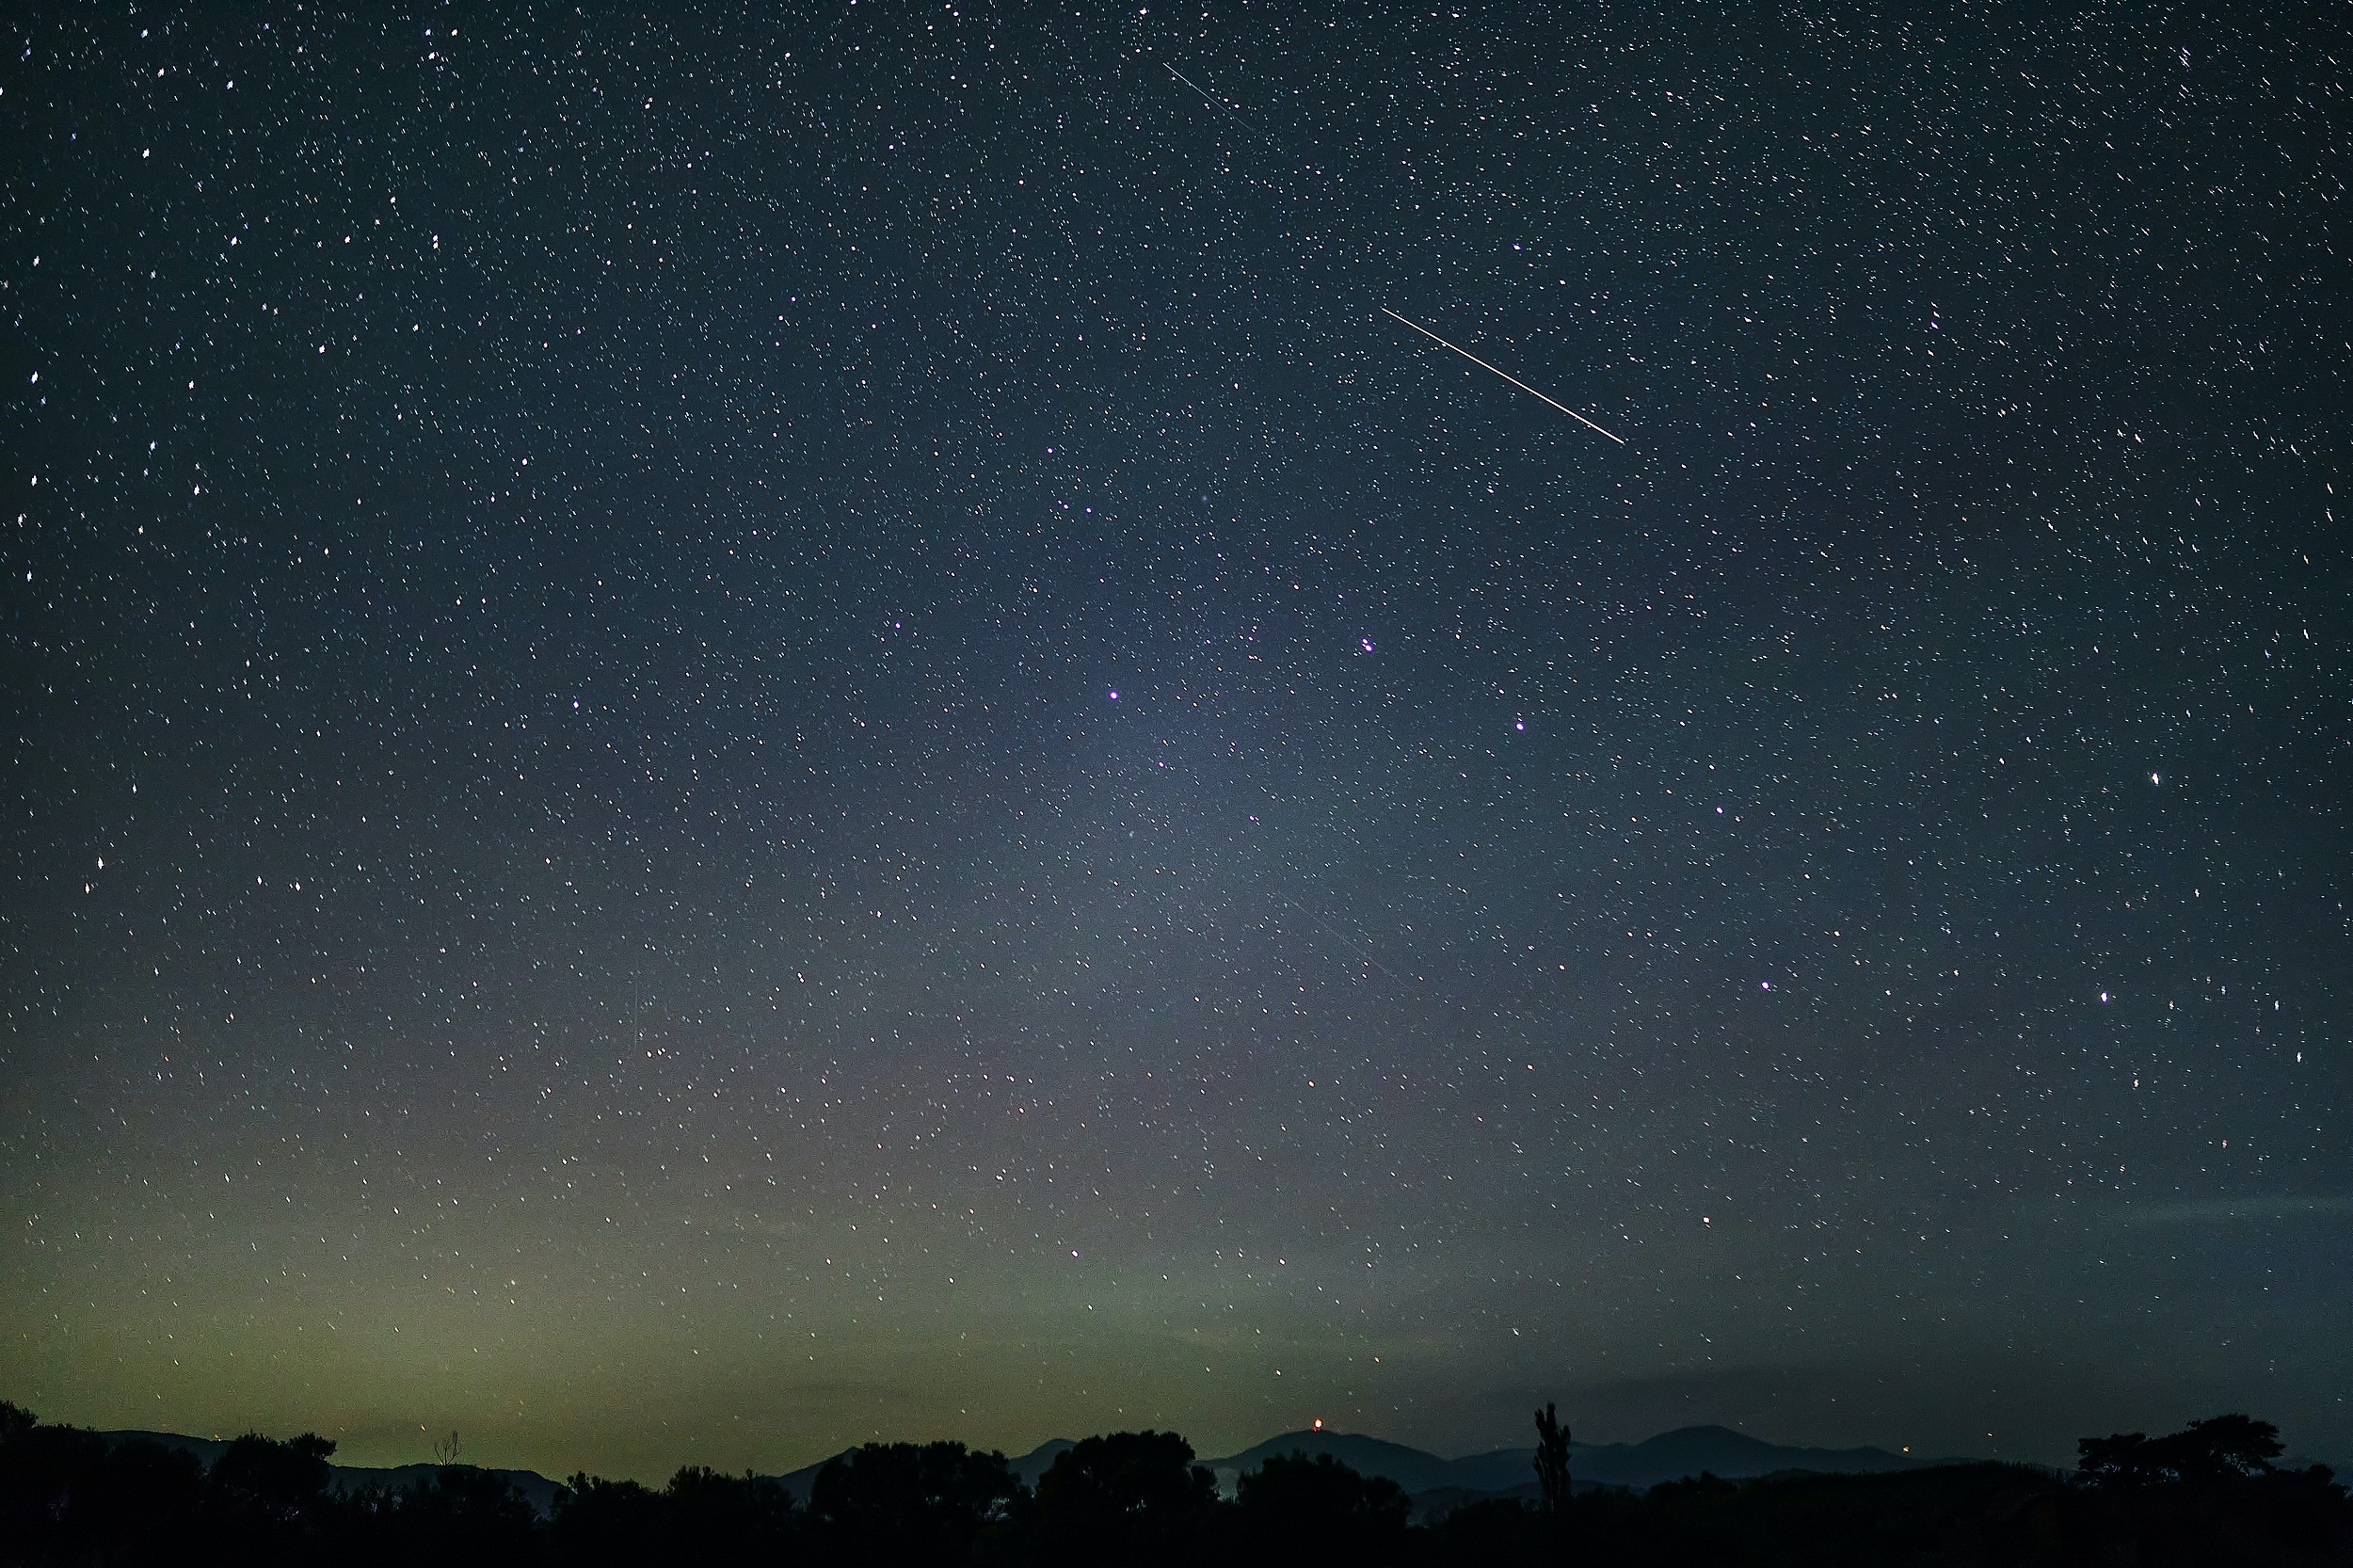 When and How to Watch the Quadrantid Meteor Shower in Michigan